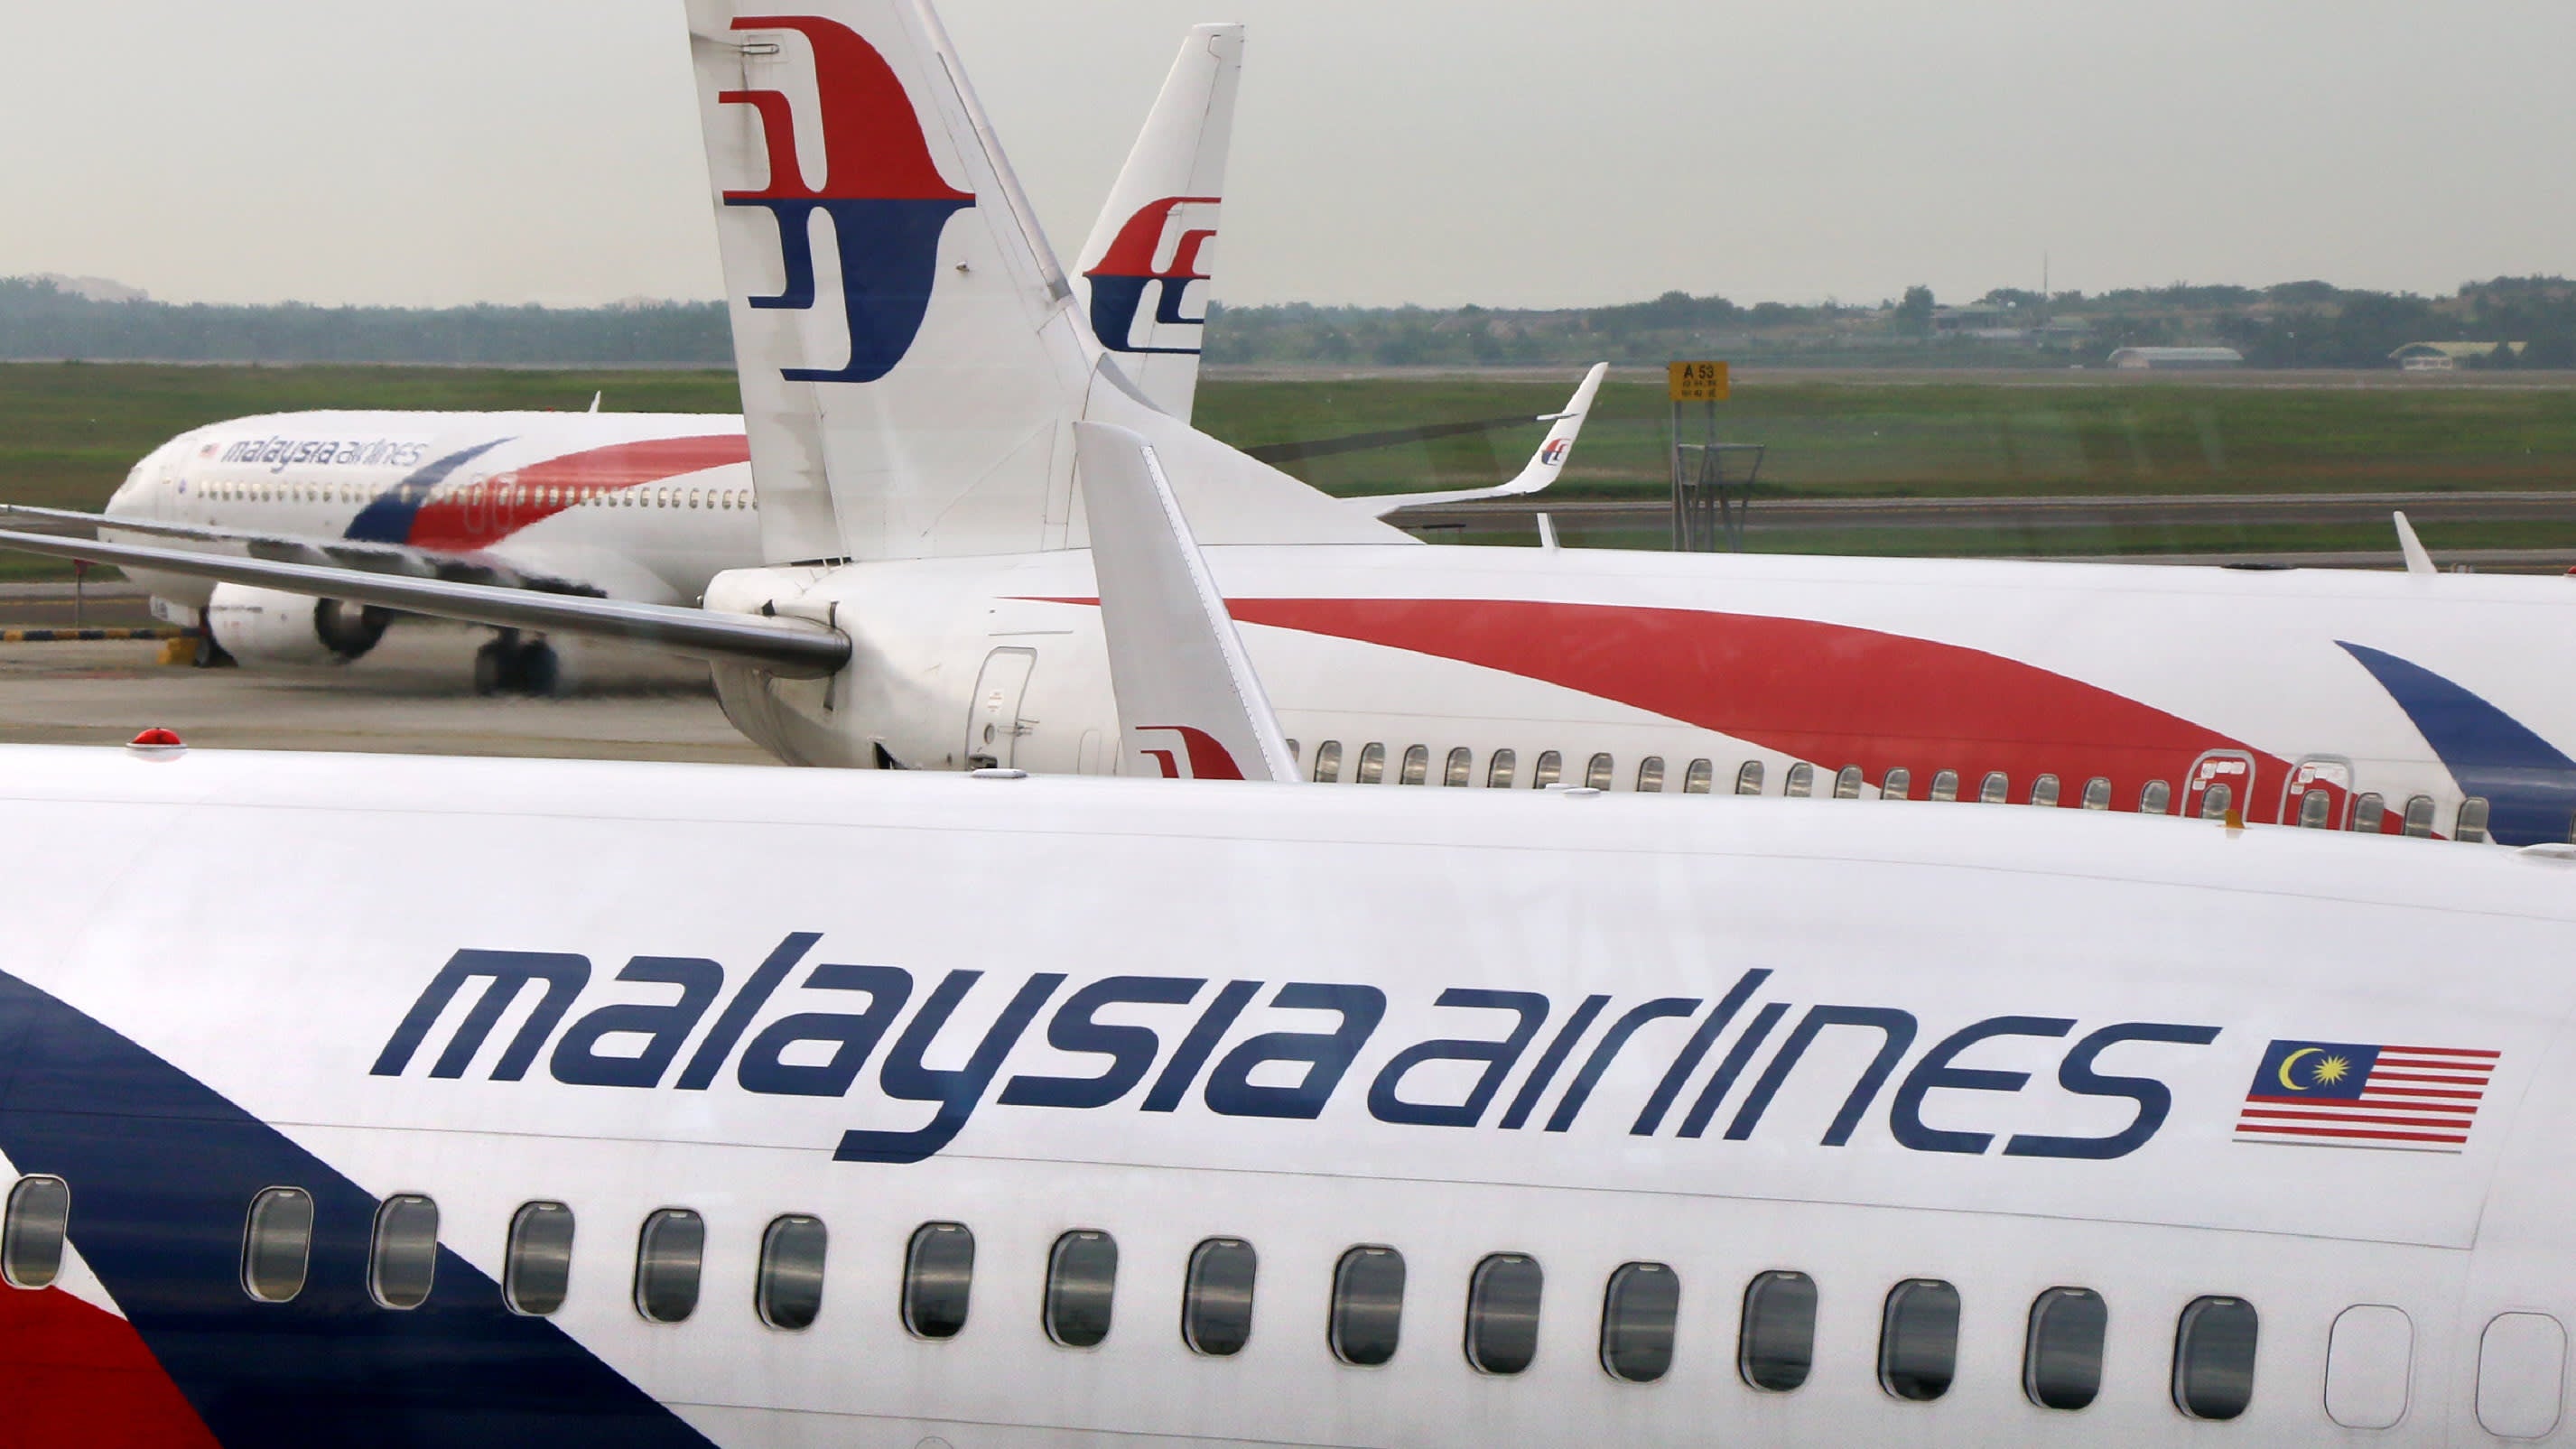 Starting 29th April, You Can Get up to 50% Off on Airfares For Malaysia Airlines Flights! - WORLD OF BUZZ